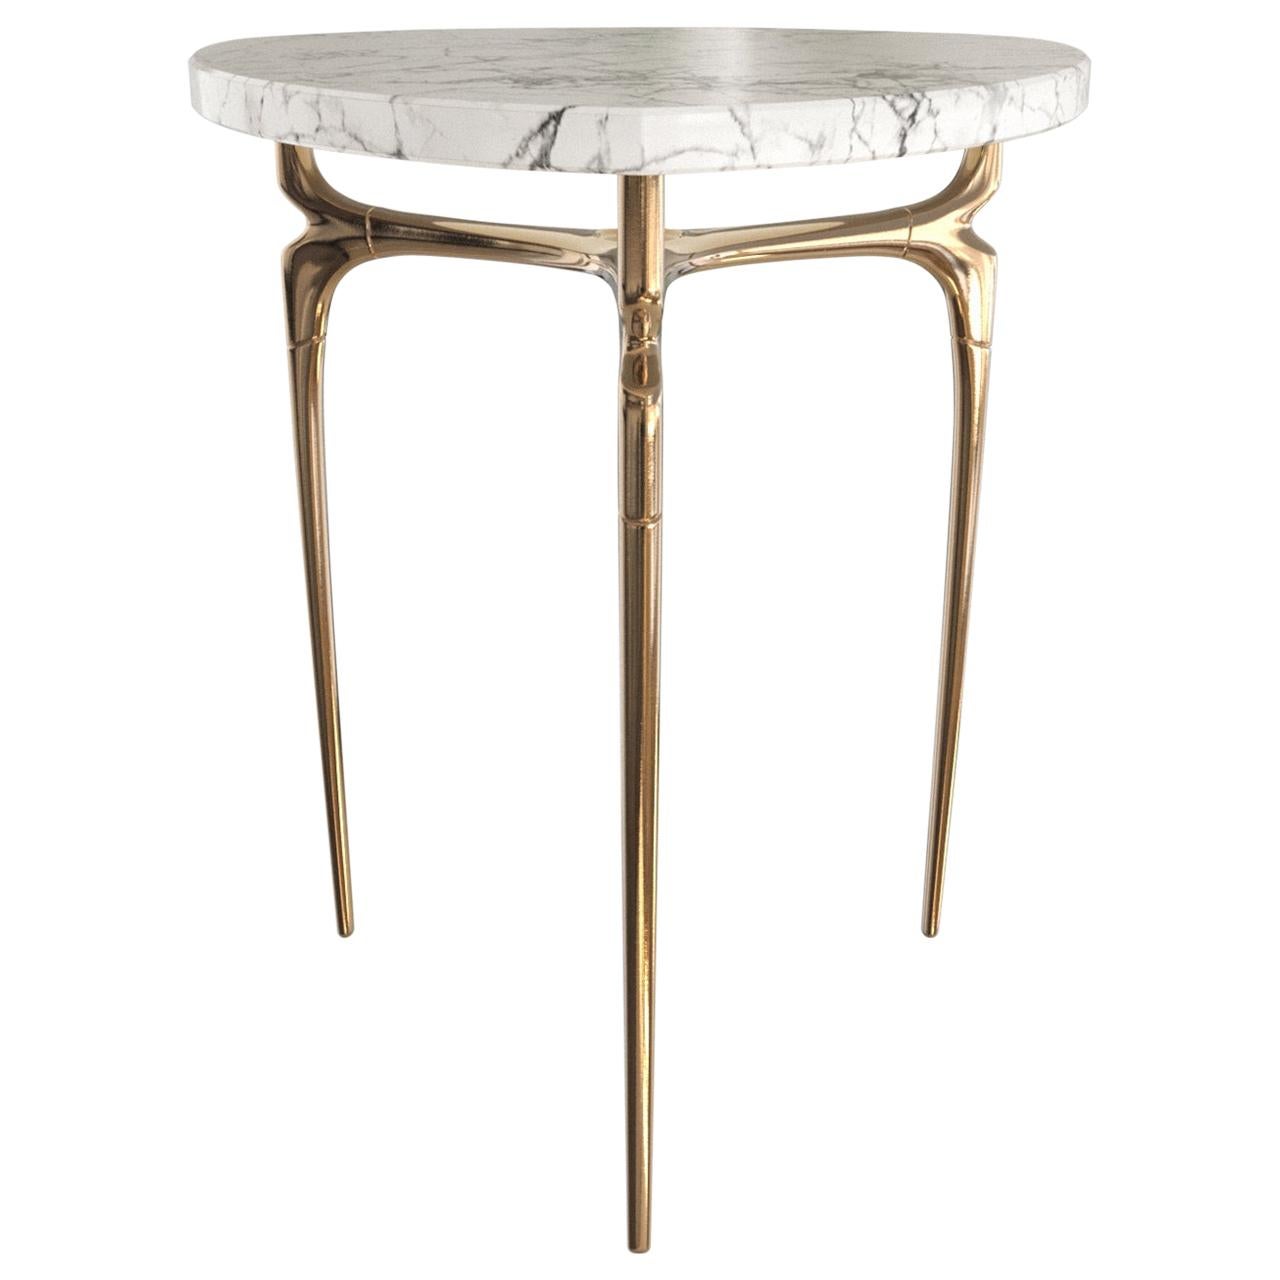 Avalon Table - Polished Bronze and Marble Top Design by Michael Sean Stolworthy For Sale